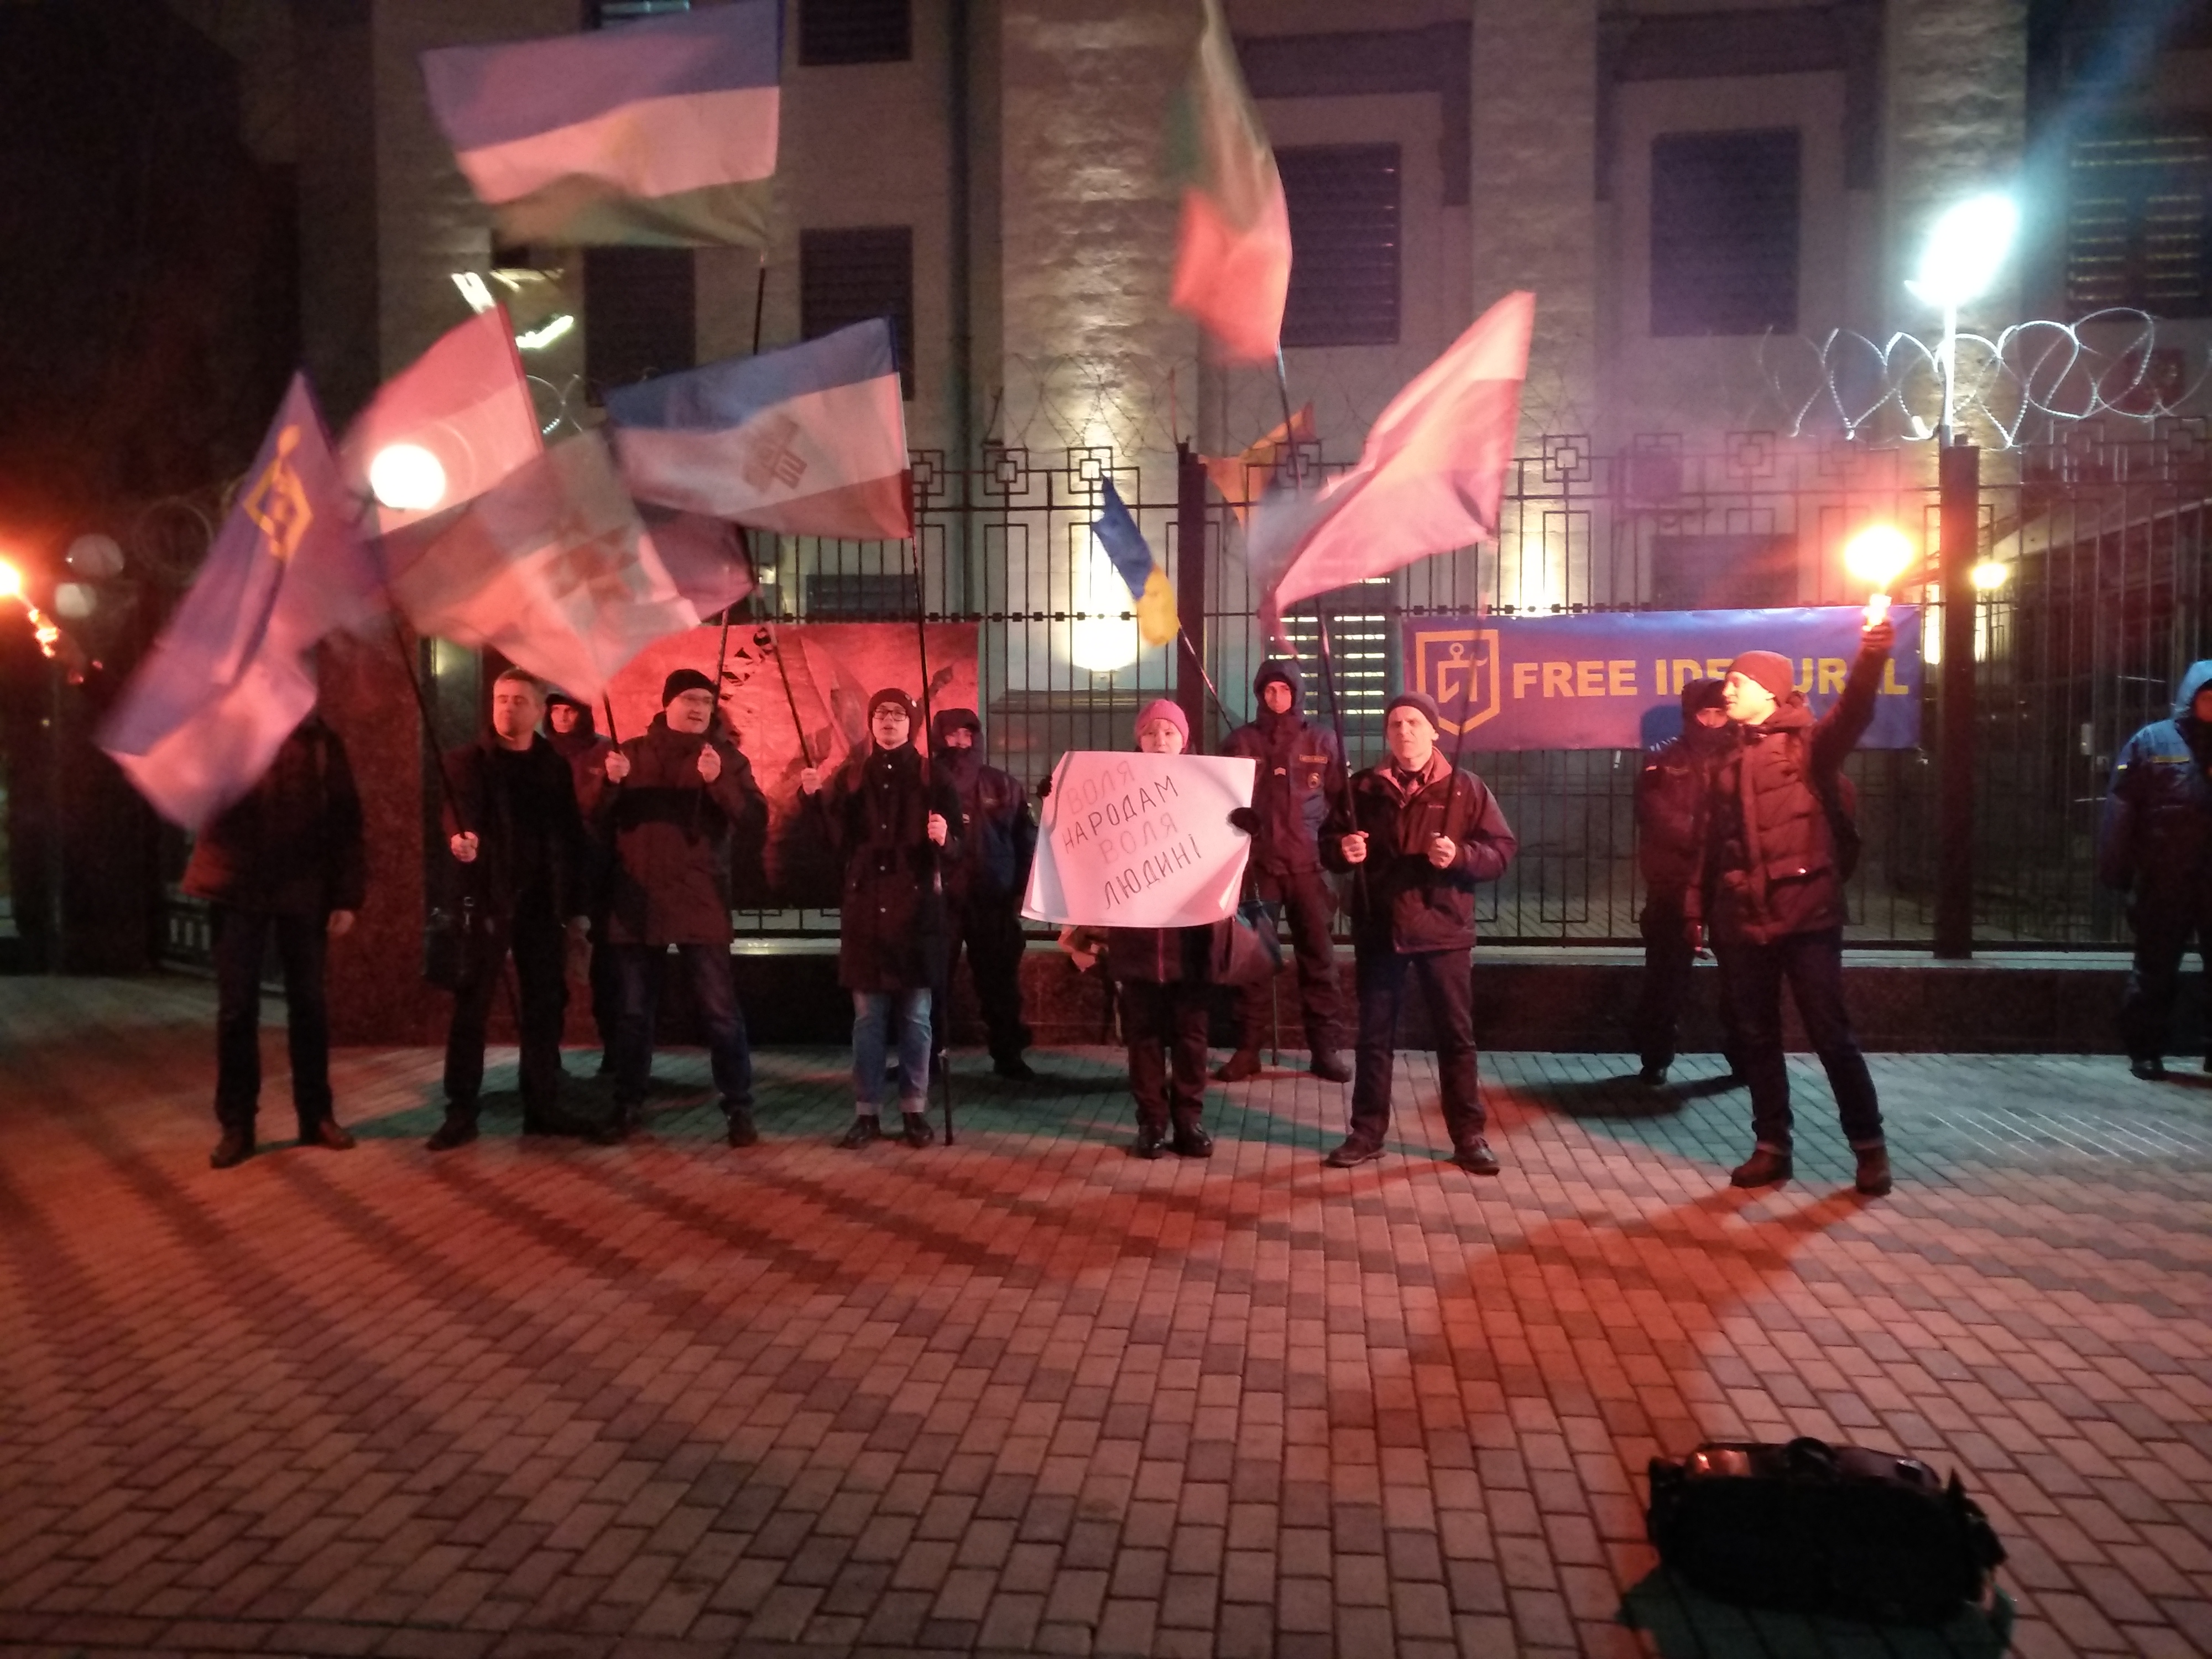 Free Idel-Ural demands from Russia to stop oppressions of freedom of speech in internet